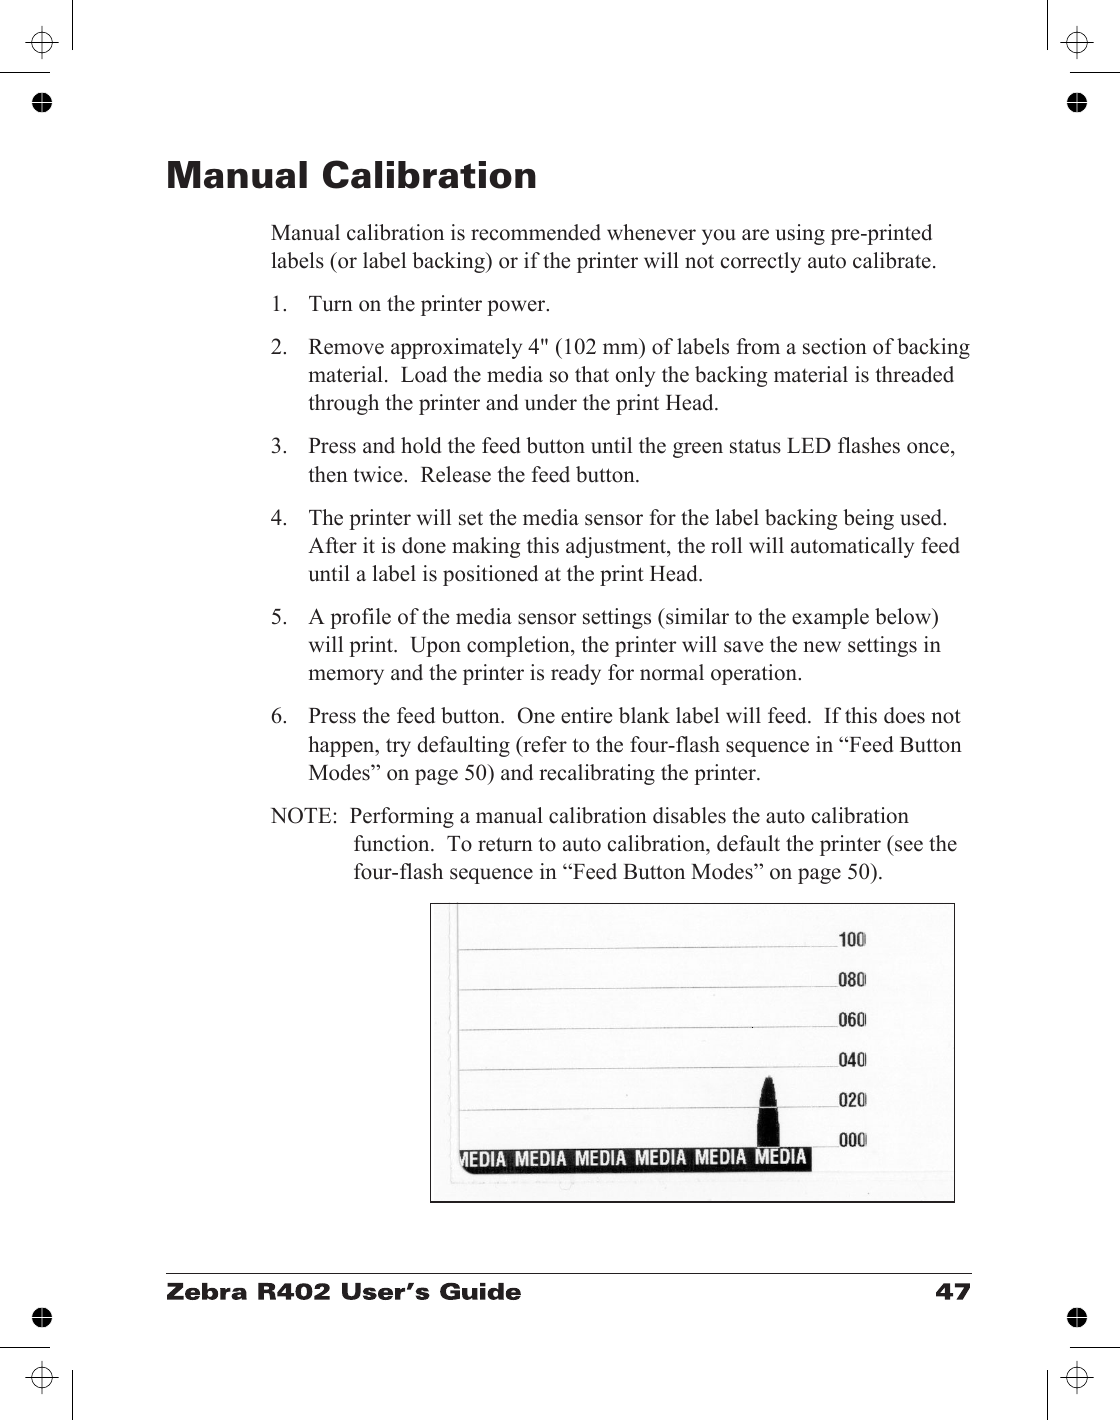 Manual CalibrationManual calibration is recommended whenever you are using pre-printedlabels (or label backing) or if the printer will not correctly auto calibrate.1. Turn on the printer power.2. Remove approximately 4&quot; (102 mm) of labels from a section of backingmaterial.  Load the media so that only the backing material is threadedthrough the printer and under the print Head.3. Press and hold the feed button until the green status LED flashes once,then twice.  Release the feed button.4. The printer will set the media sensor for the label backing being used.After it is done making this adjustment, the roll will automatically feeduntil a label is positioned at the print Head.5. A profile of the media sensor settings (similar to the example below)will print.  Upon completion, the printer will save the new settings inmemory and the printer is ready for normal operation.6. Press the feed button.  One entire blank label will feed.  If this does nothappen, try defaulting (refer to the four-flash sequence in “Feed ButtonModes” on page 50) and recalibrating the printer.NOTE:  Performing a manual calibration disables the auto calibrationfunction.  To return to auto calibration, default the printer (see thefour-flash sequence in “Feed Button Modes” on page 50).